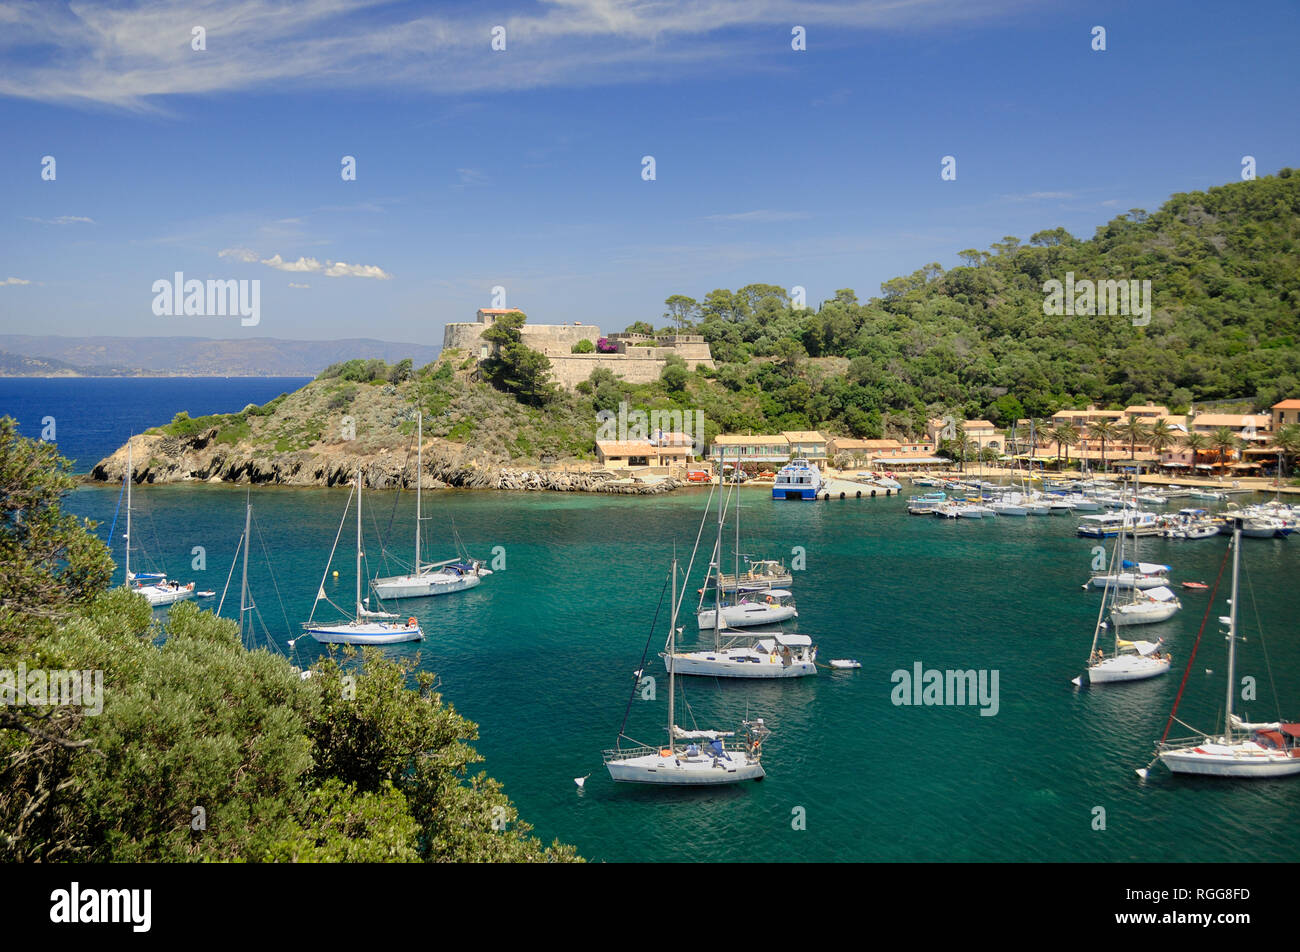 Port and Yachts in Bay at Port-Cros or Port Cros National Park Îles d'Hyères or Hyères Islands Var Provence France Stock Photo